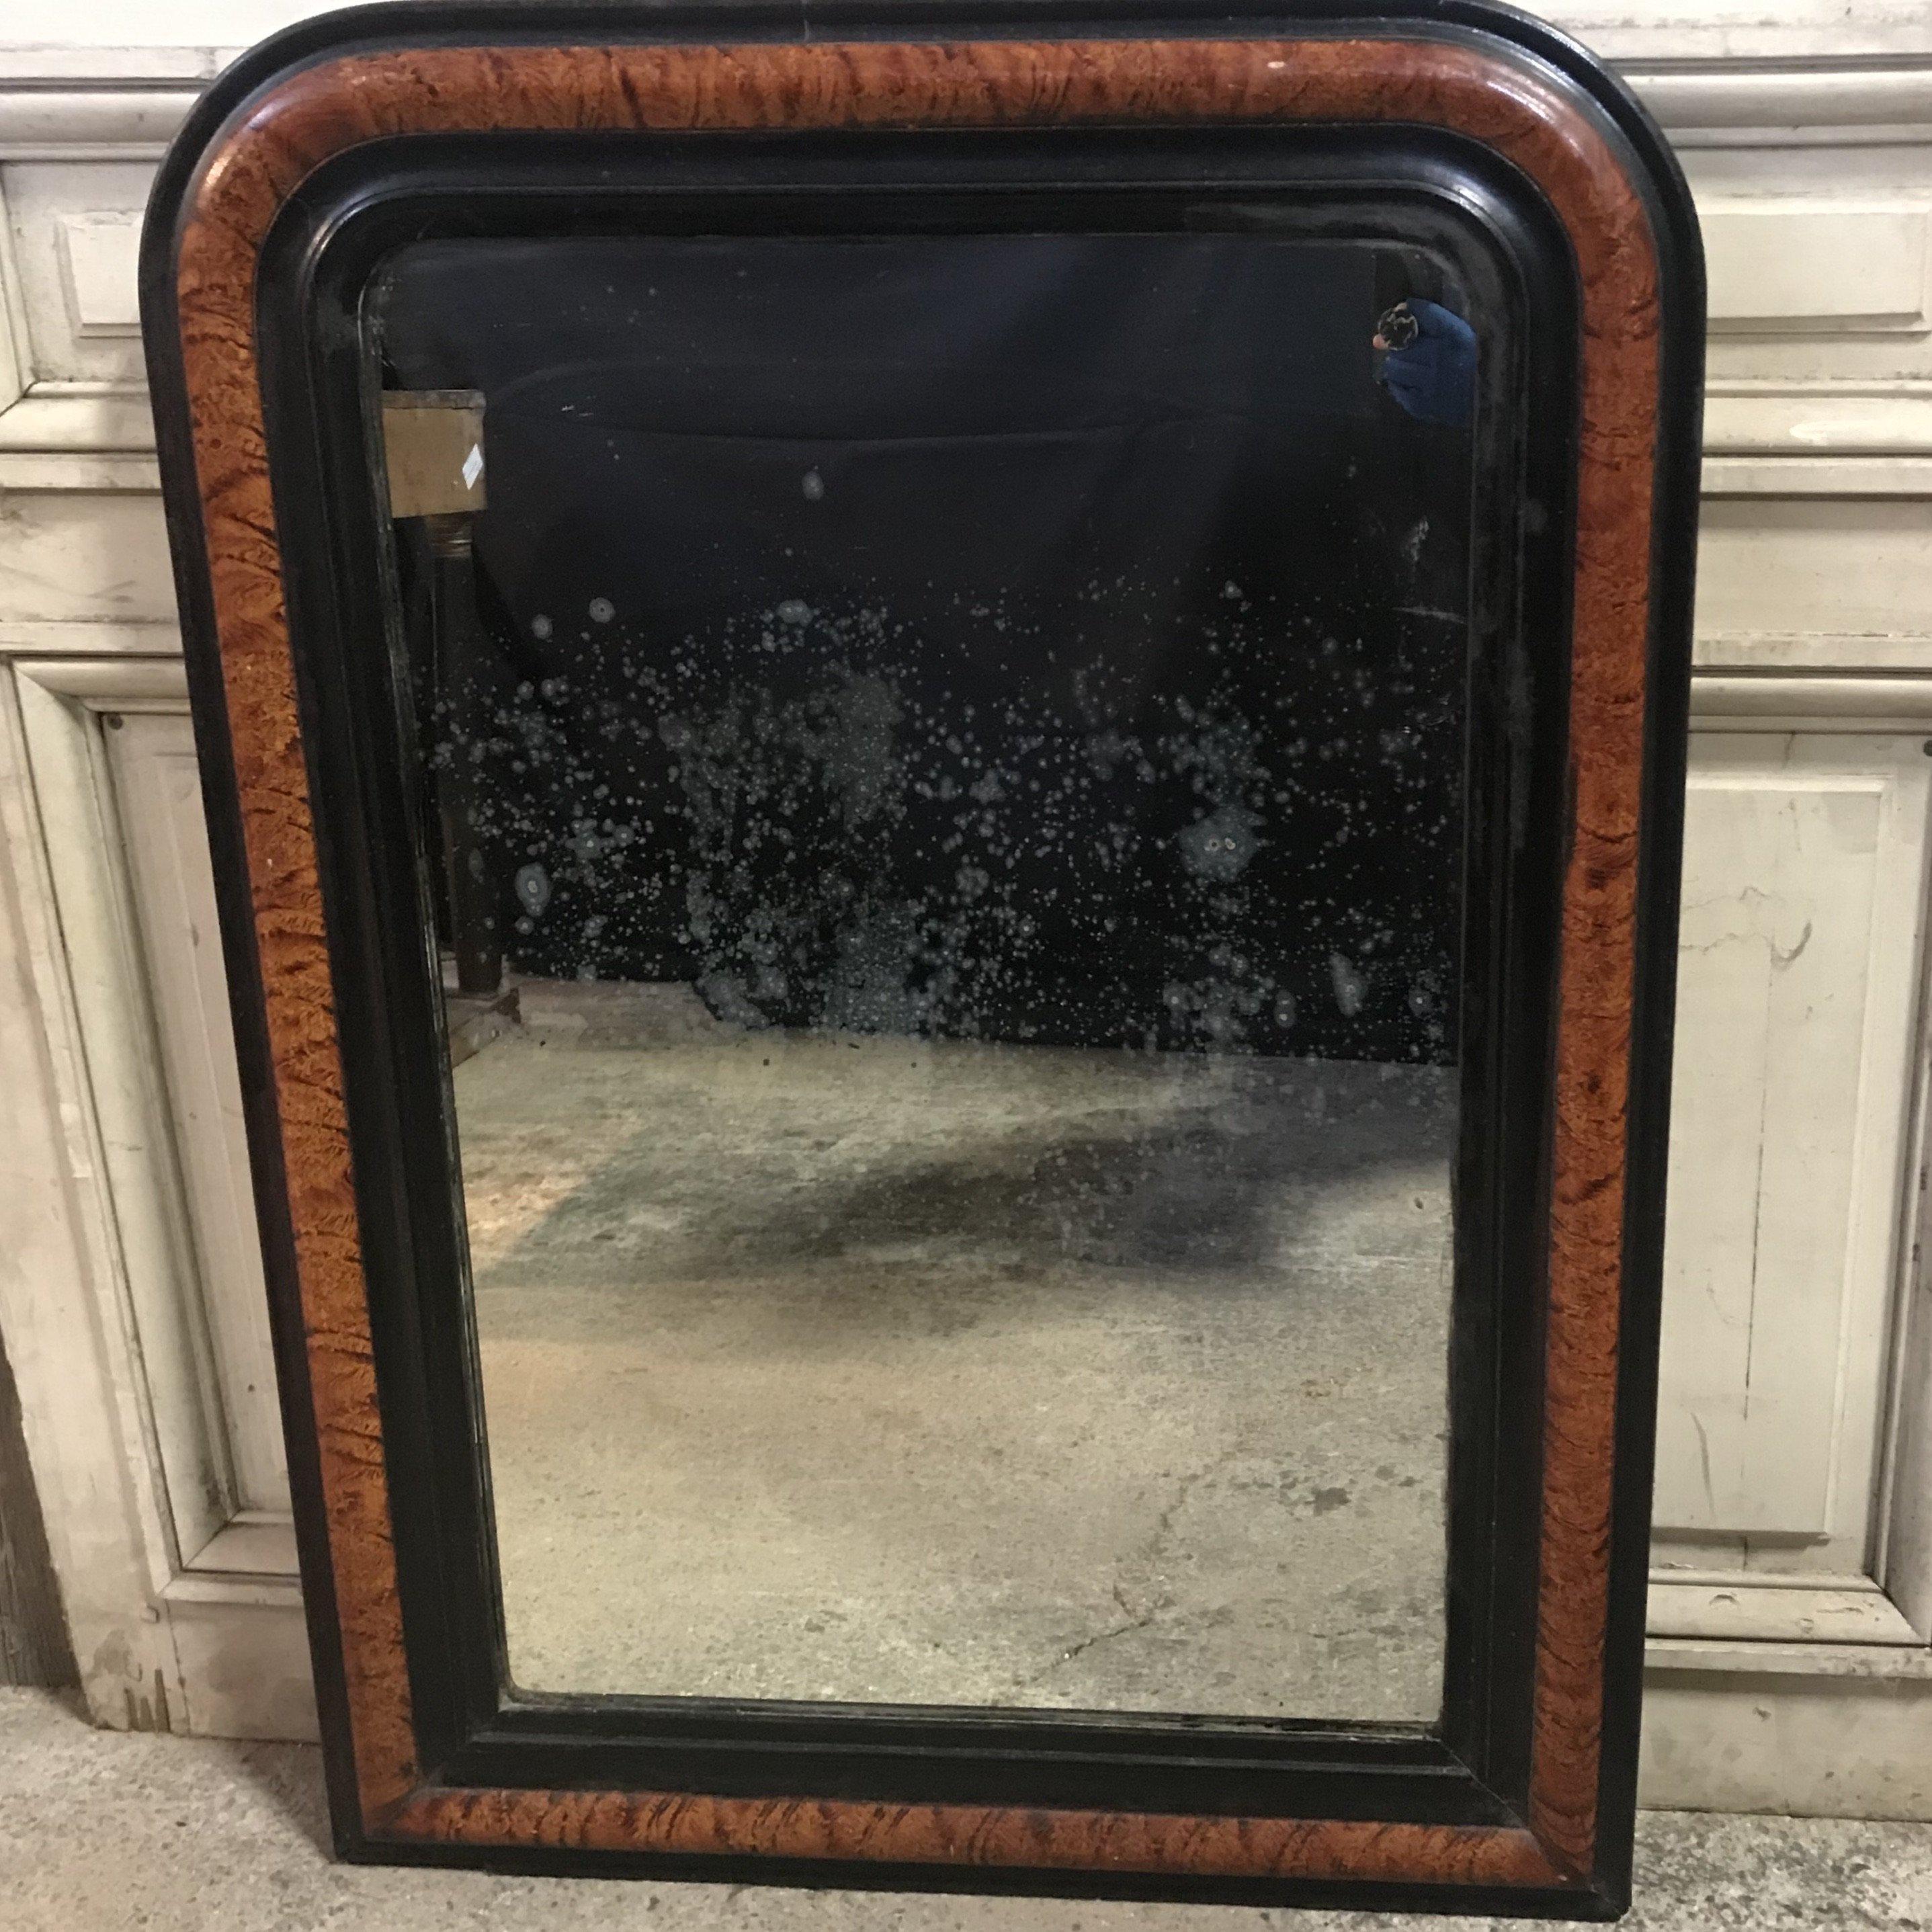 Late 19th century Louis Philippe mirror having beautiful faux bois painted finish on the frame which looks like wood grain, in a rich brown tone rimmed with ebony. The mirror itself shows age with some spotting, which speaks to the age of the piece,